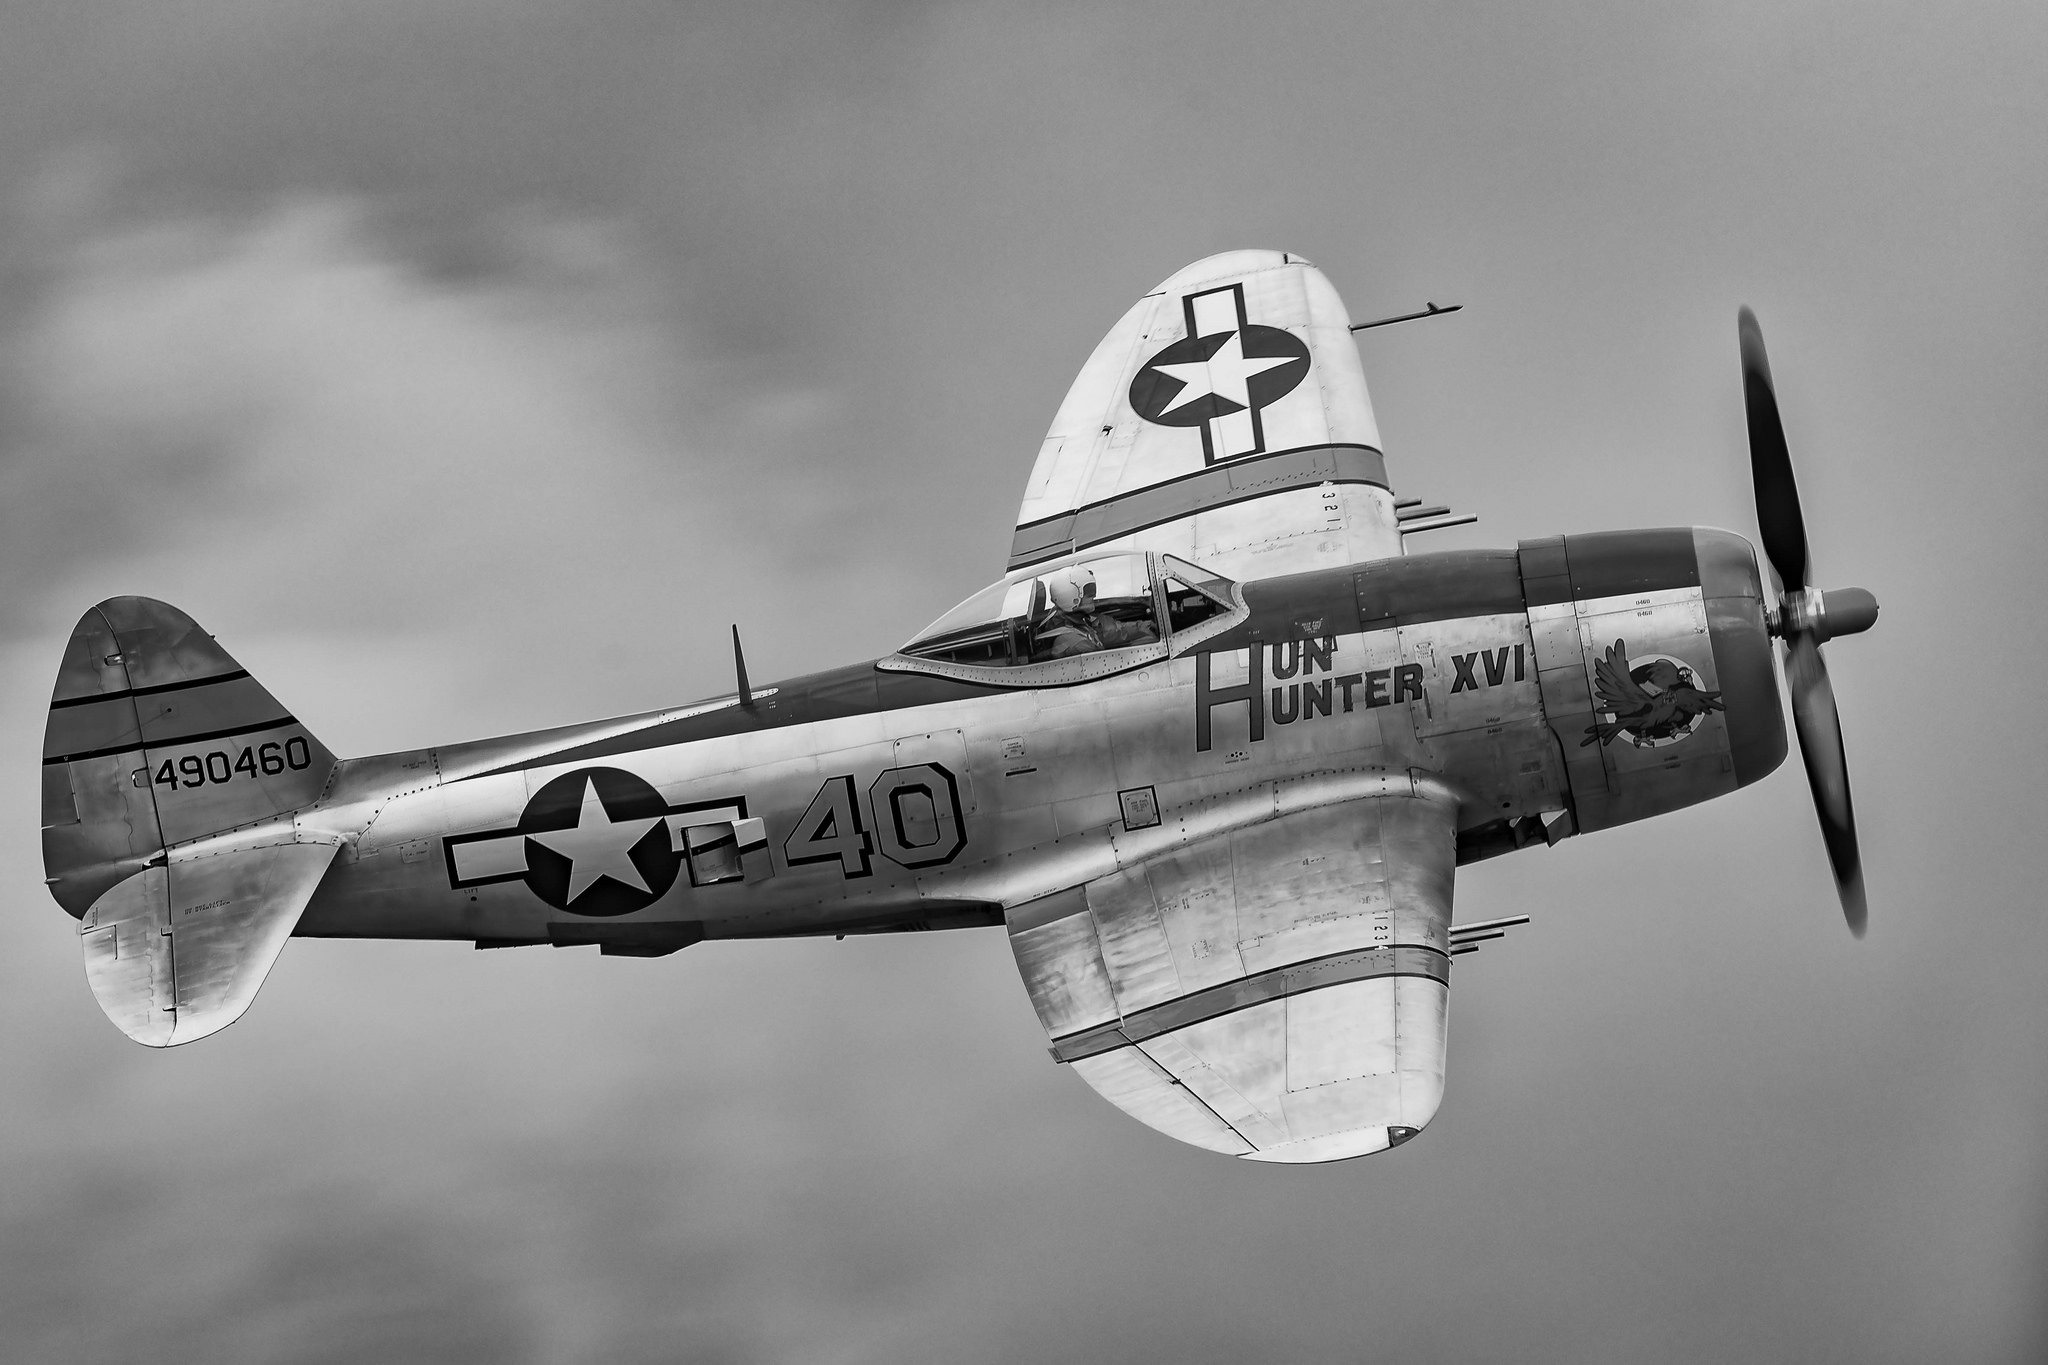 General 2048x1365 aircraft vehicle monochrome military aircraft military numbers Republic P-47 Thunderbolt American aircraft